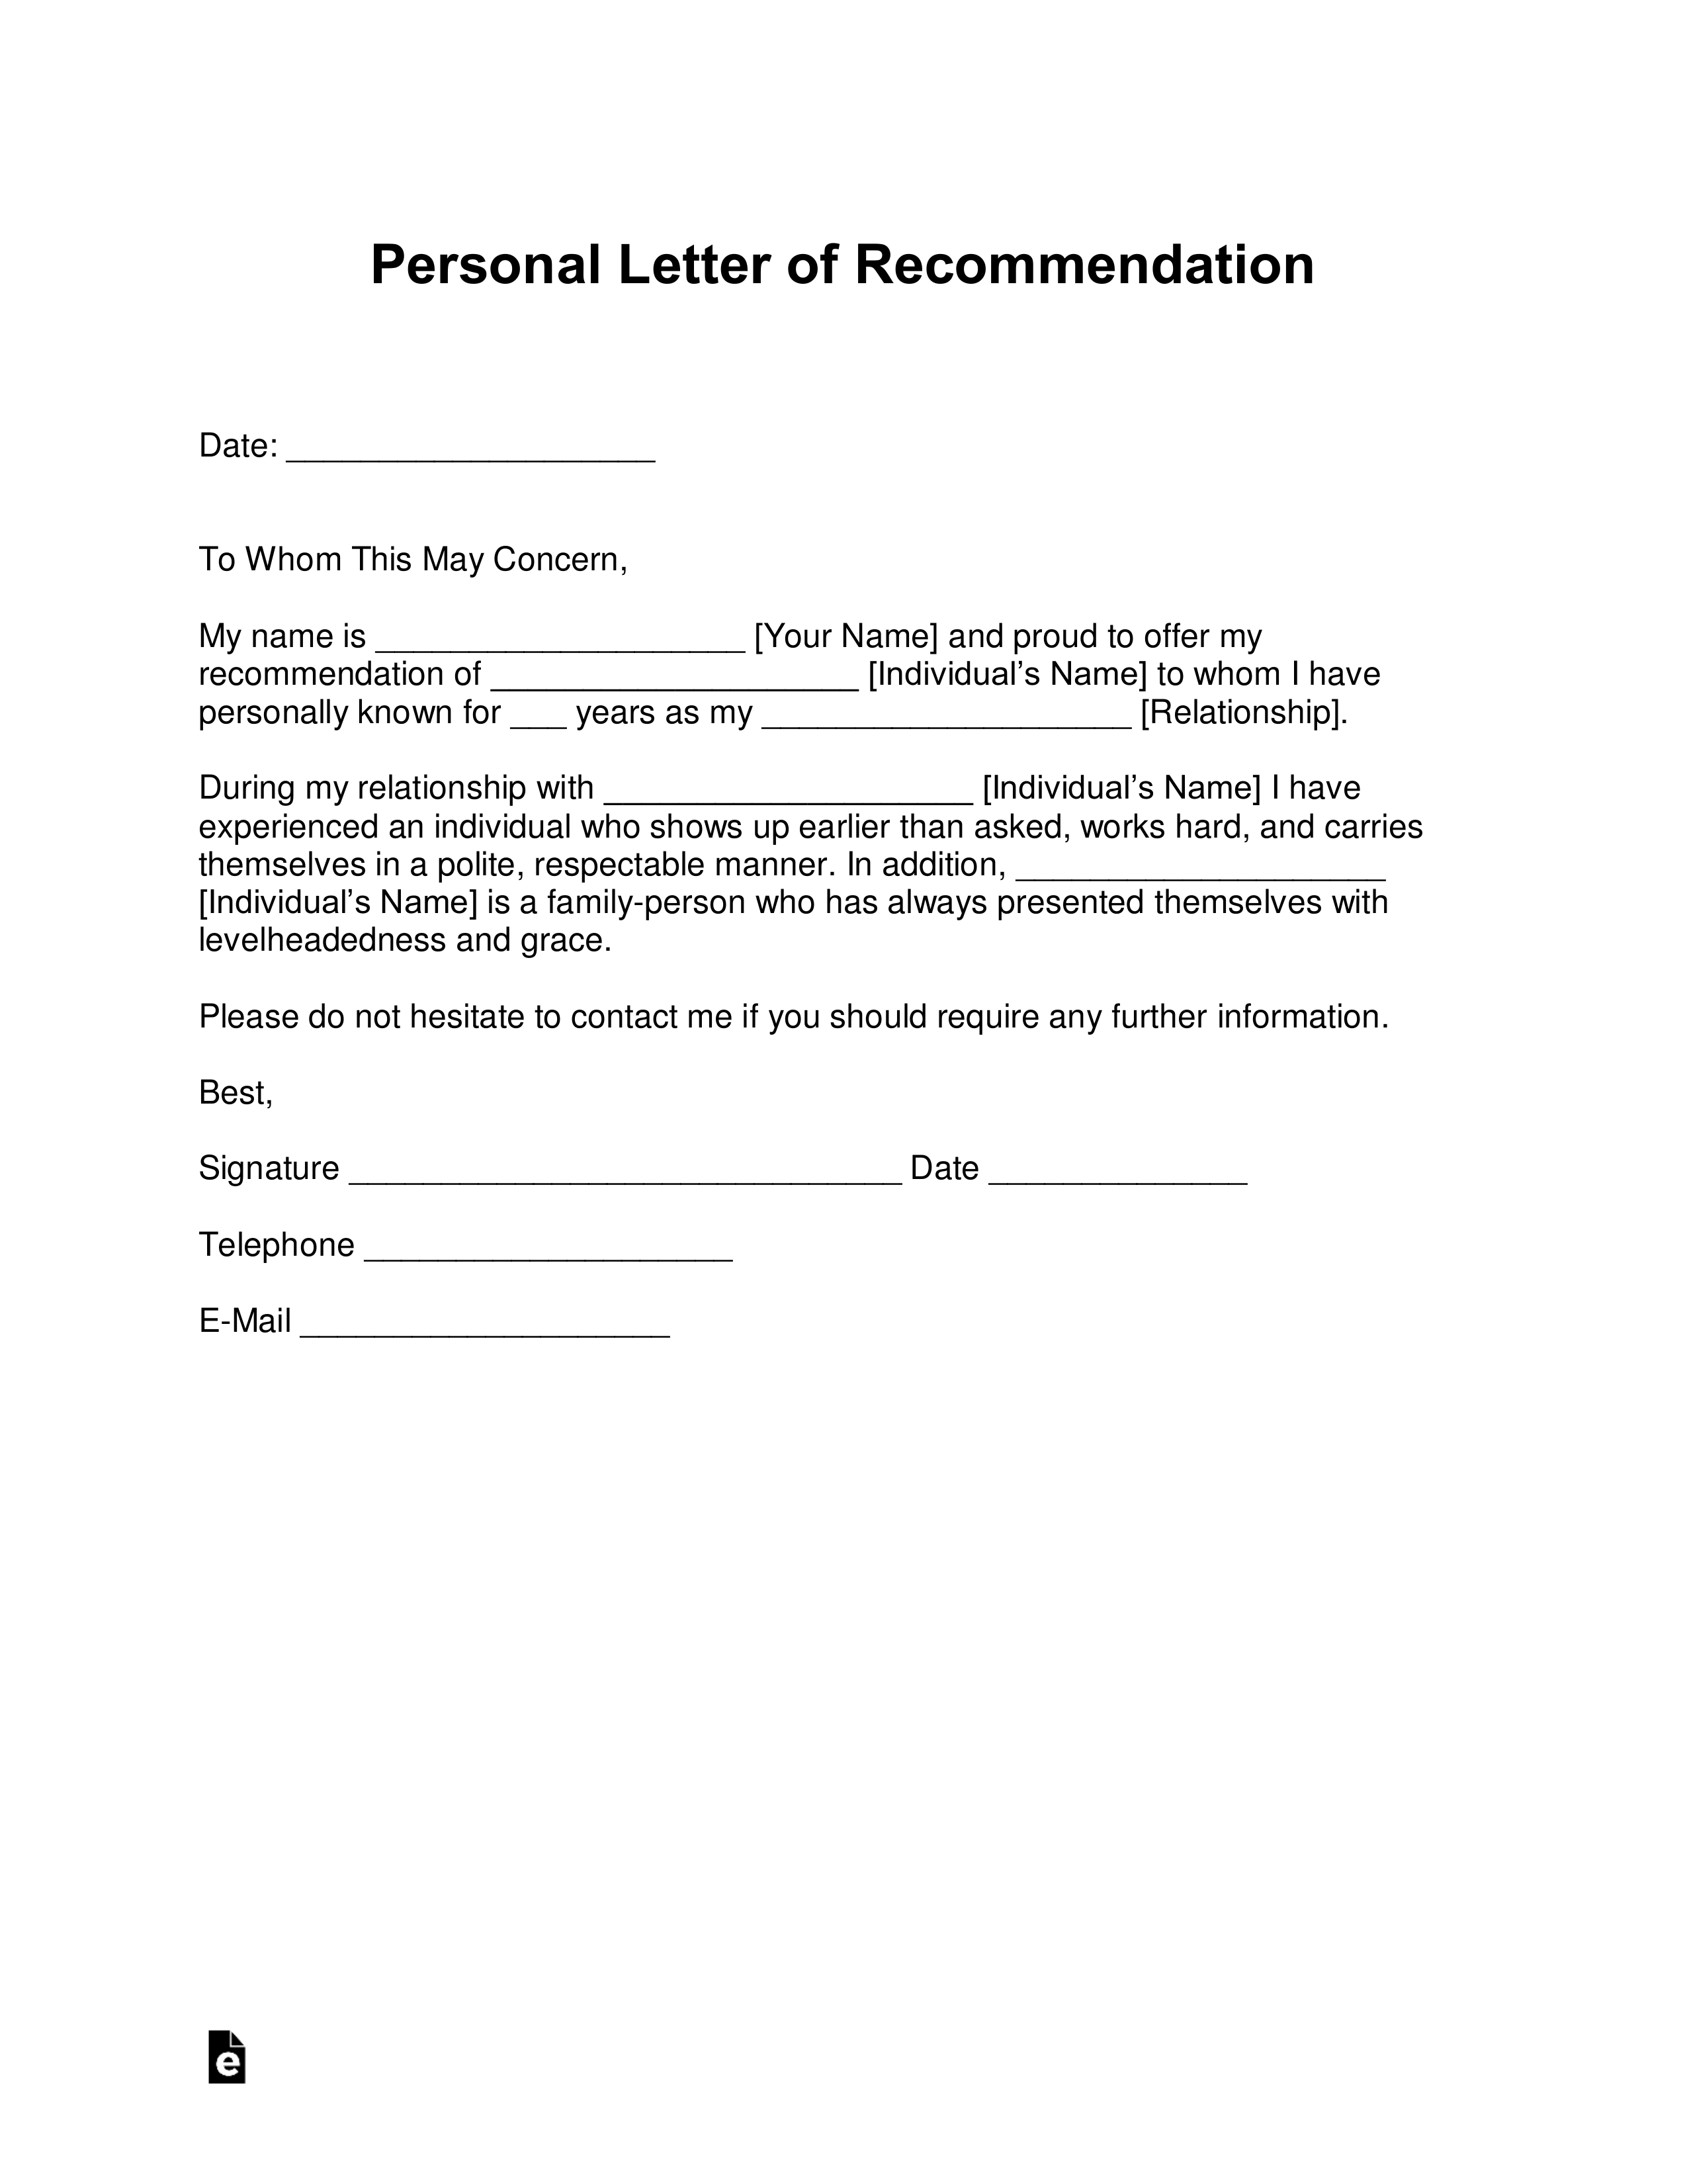 Free Personal Letter Of Recommendation Template For A Friend With Samples PDF Word EForms